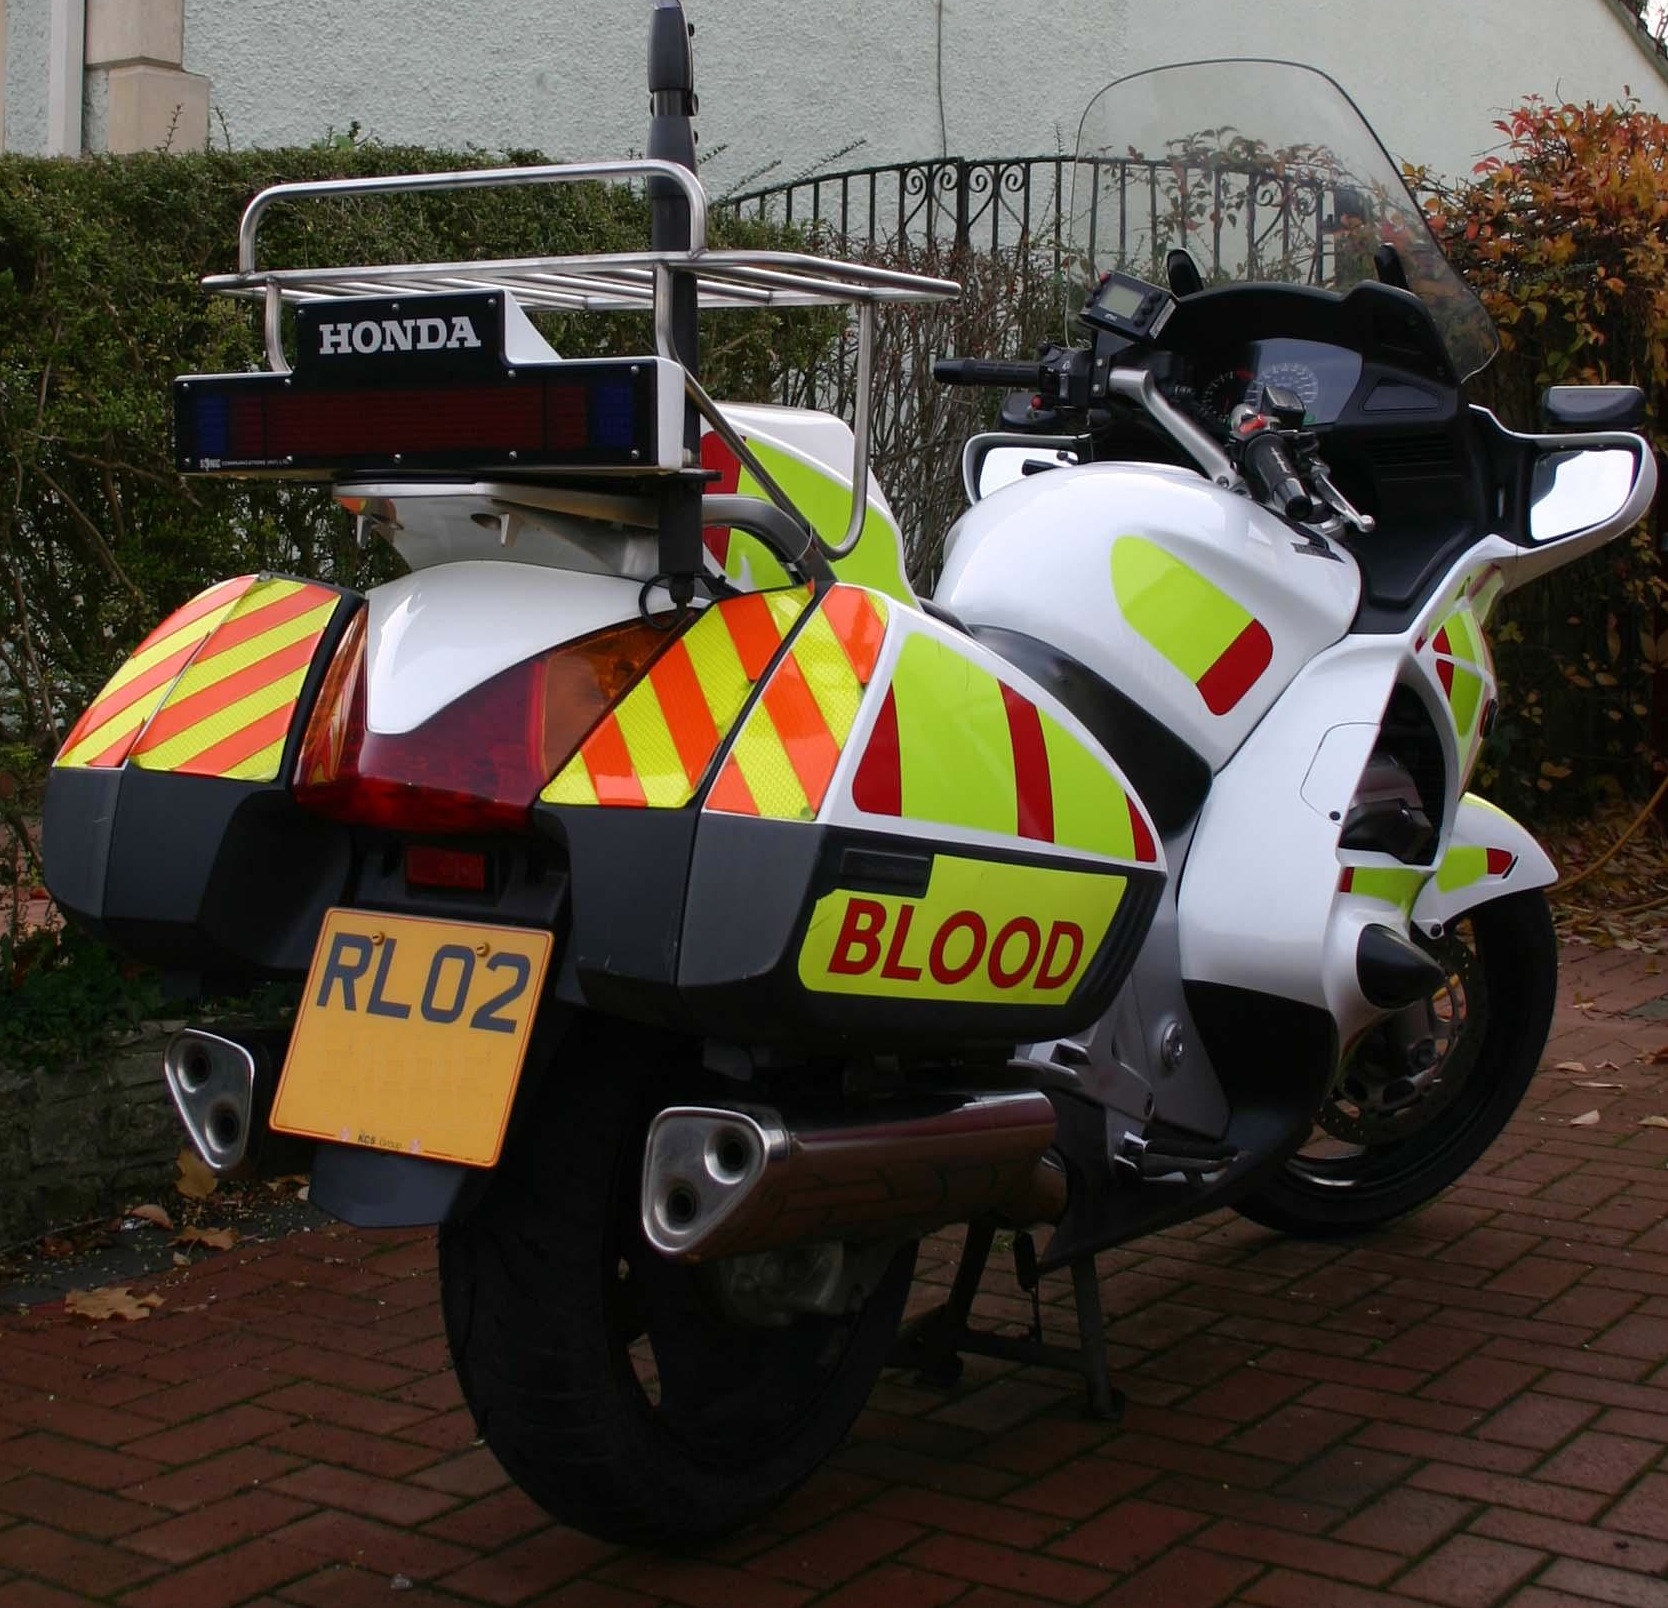 ST1300_blood_bike_with_panniers_and_rack.jpg